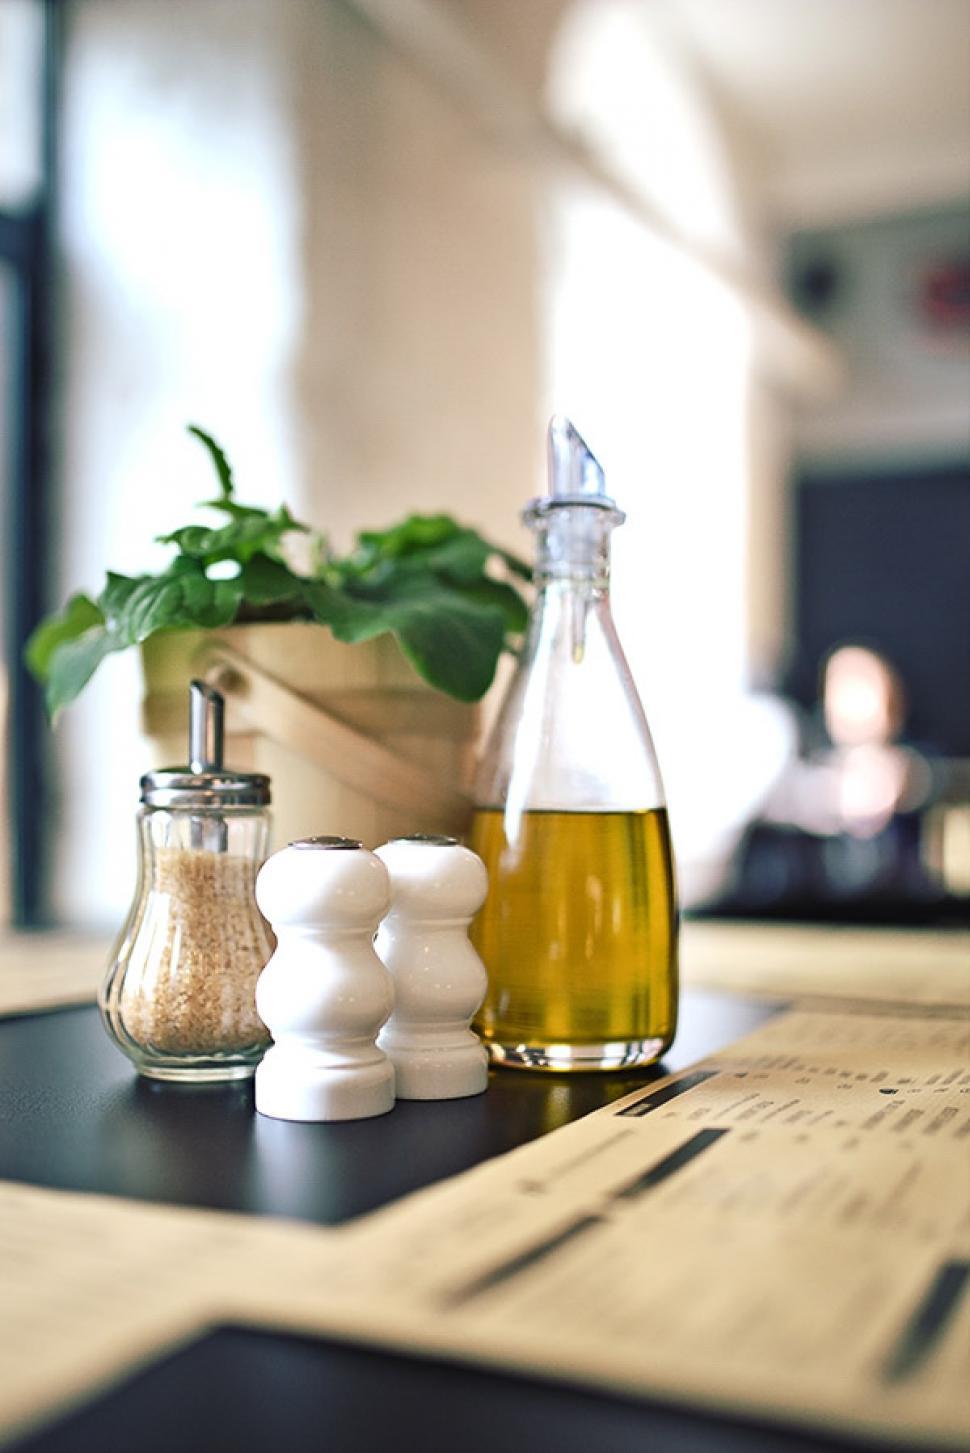 Free Image of Table With Olive Oil Bottle and Potted Plant 